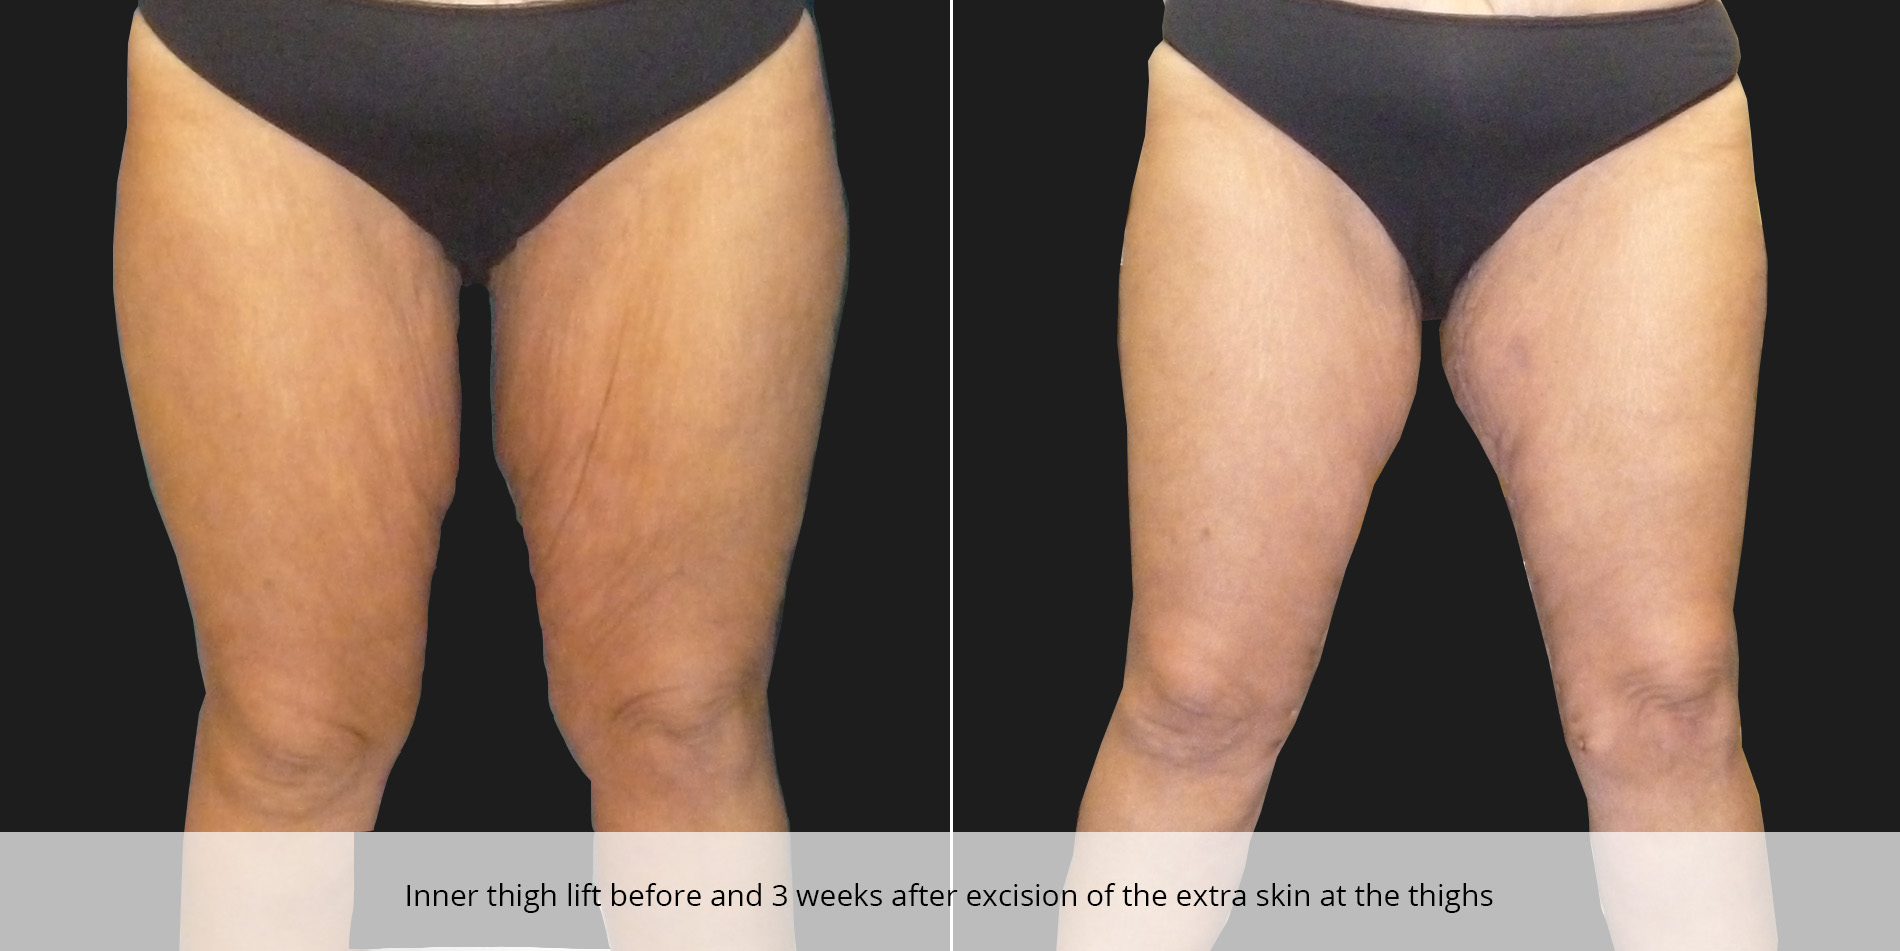 Body Cosmetic Procedures: inner thigh lift procedure, inner thigh lift  plastic surgery